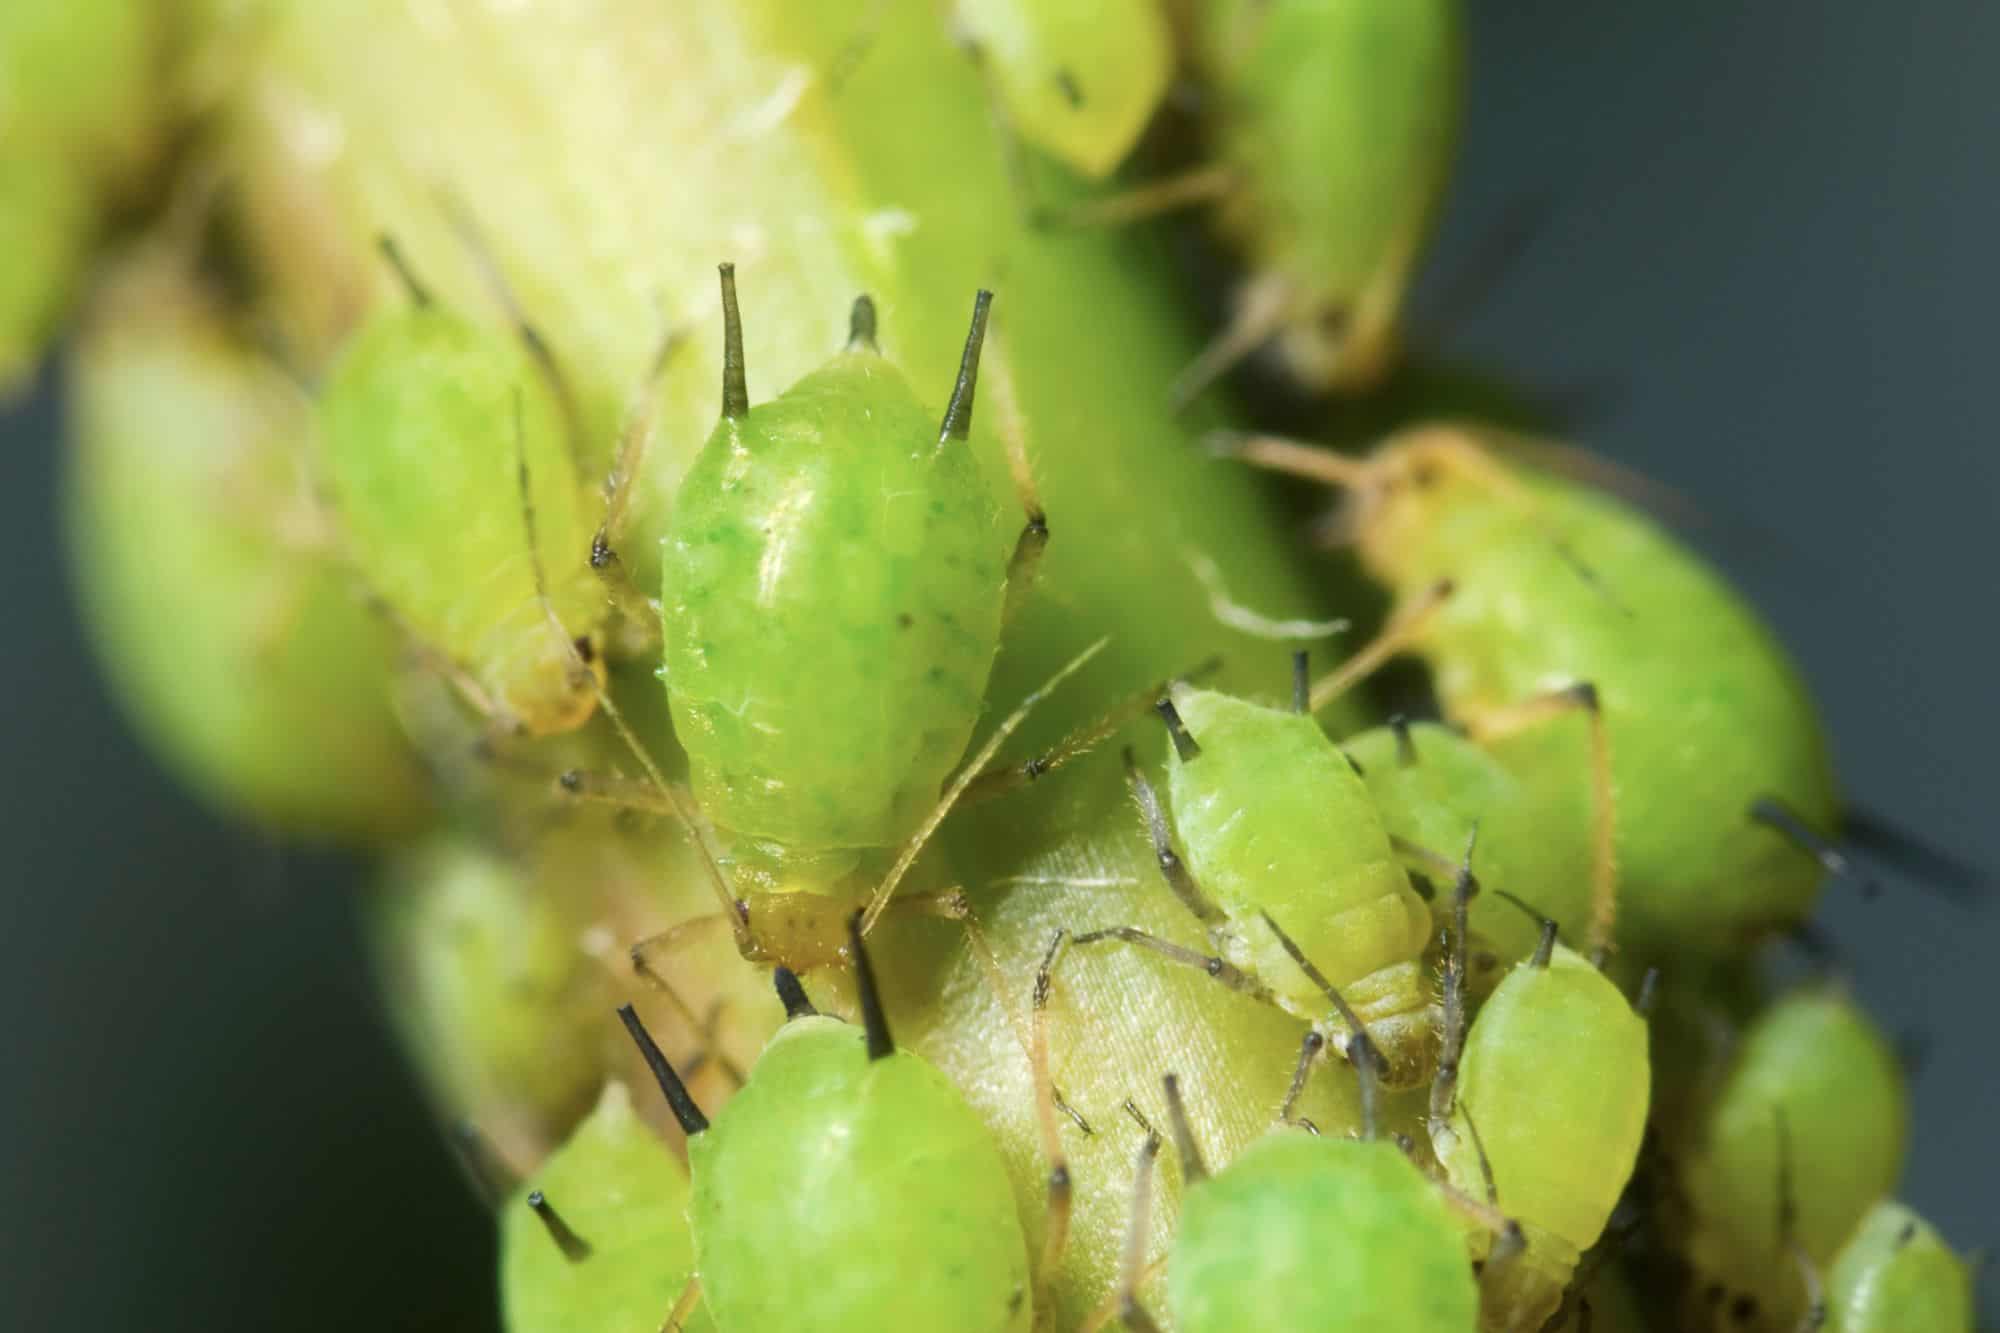 Aphids infesting a plant stock.